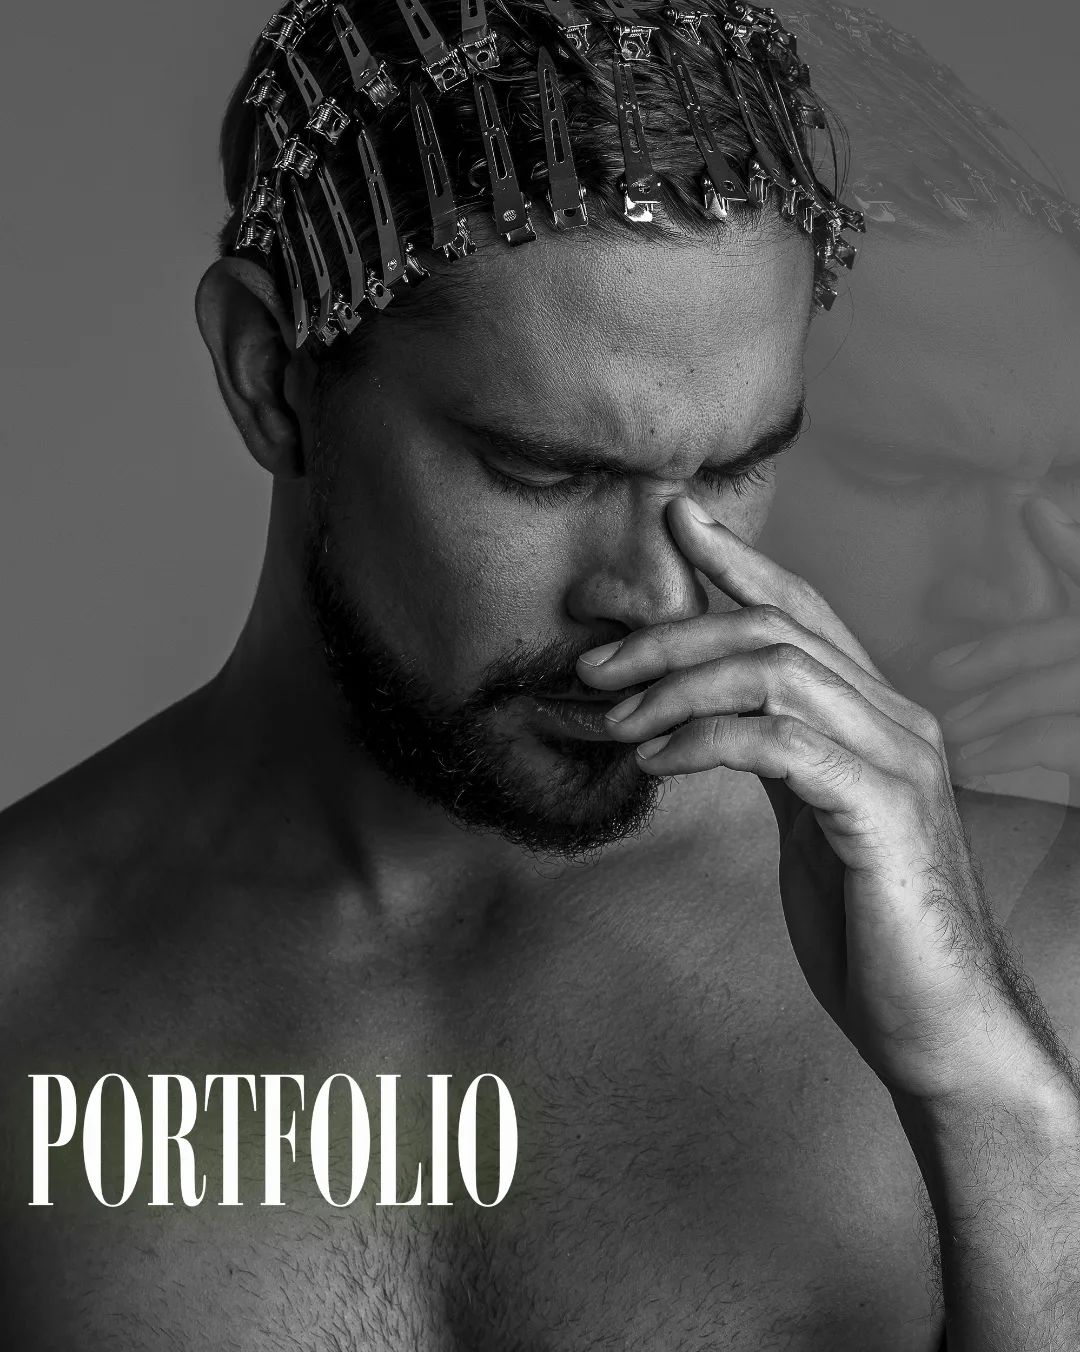 https://f.radikal.host/2023/04/06/Photo-by-REVISTA-PORTFOLIO-BRAZIL-on-March-19-2023.-May-be-a-black-and-white-image-of-1-person-beard-and-text-that-says-PORTFOLIO..jpg